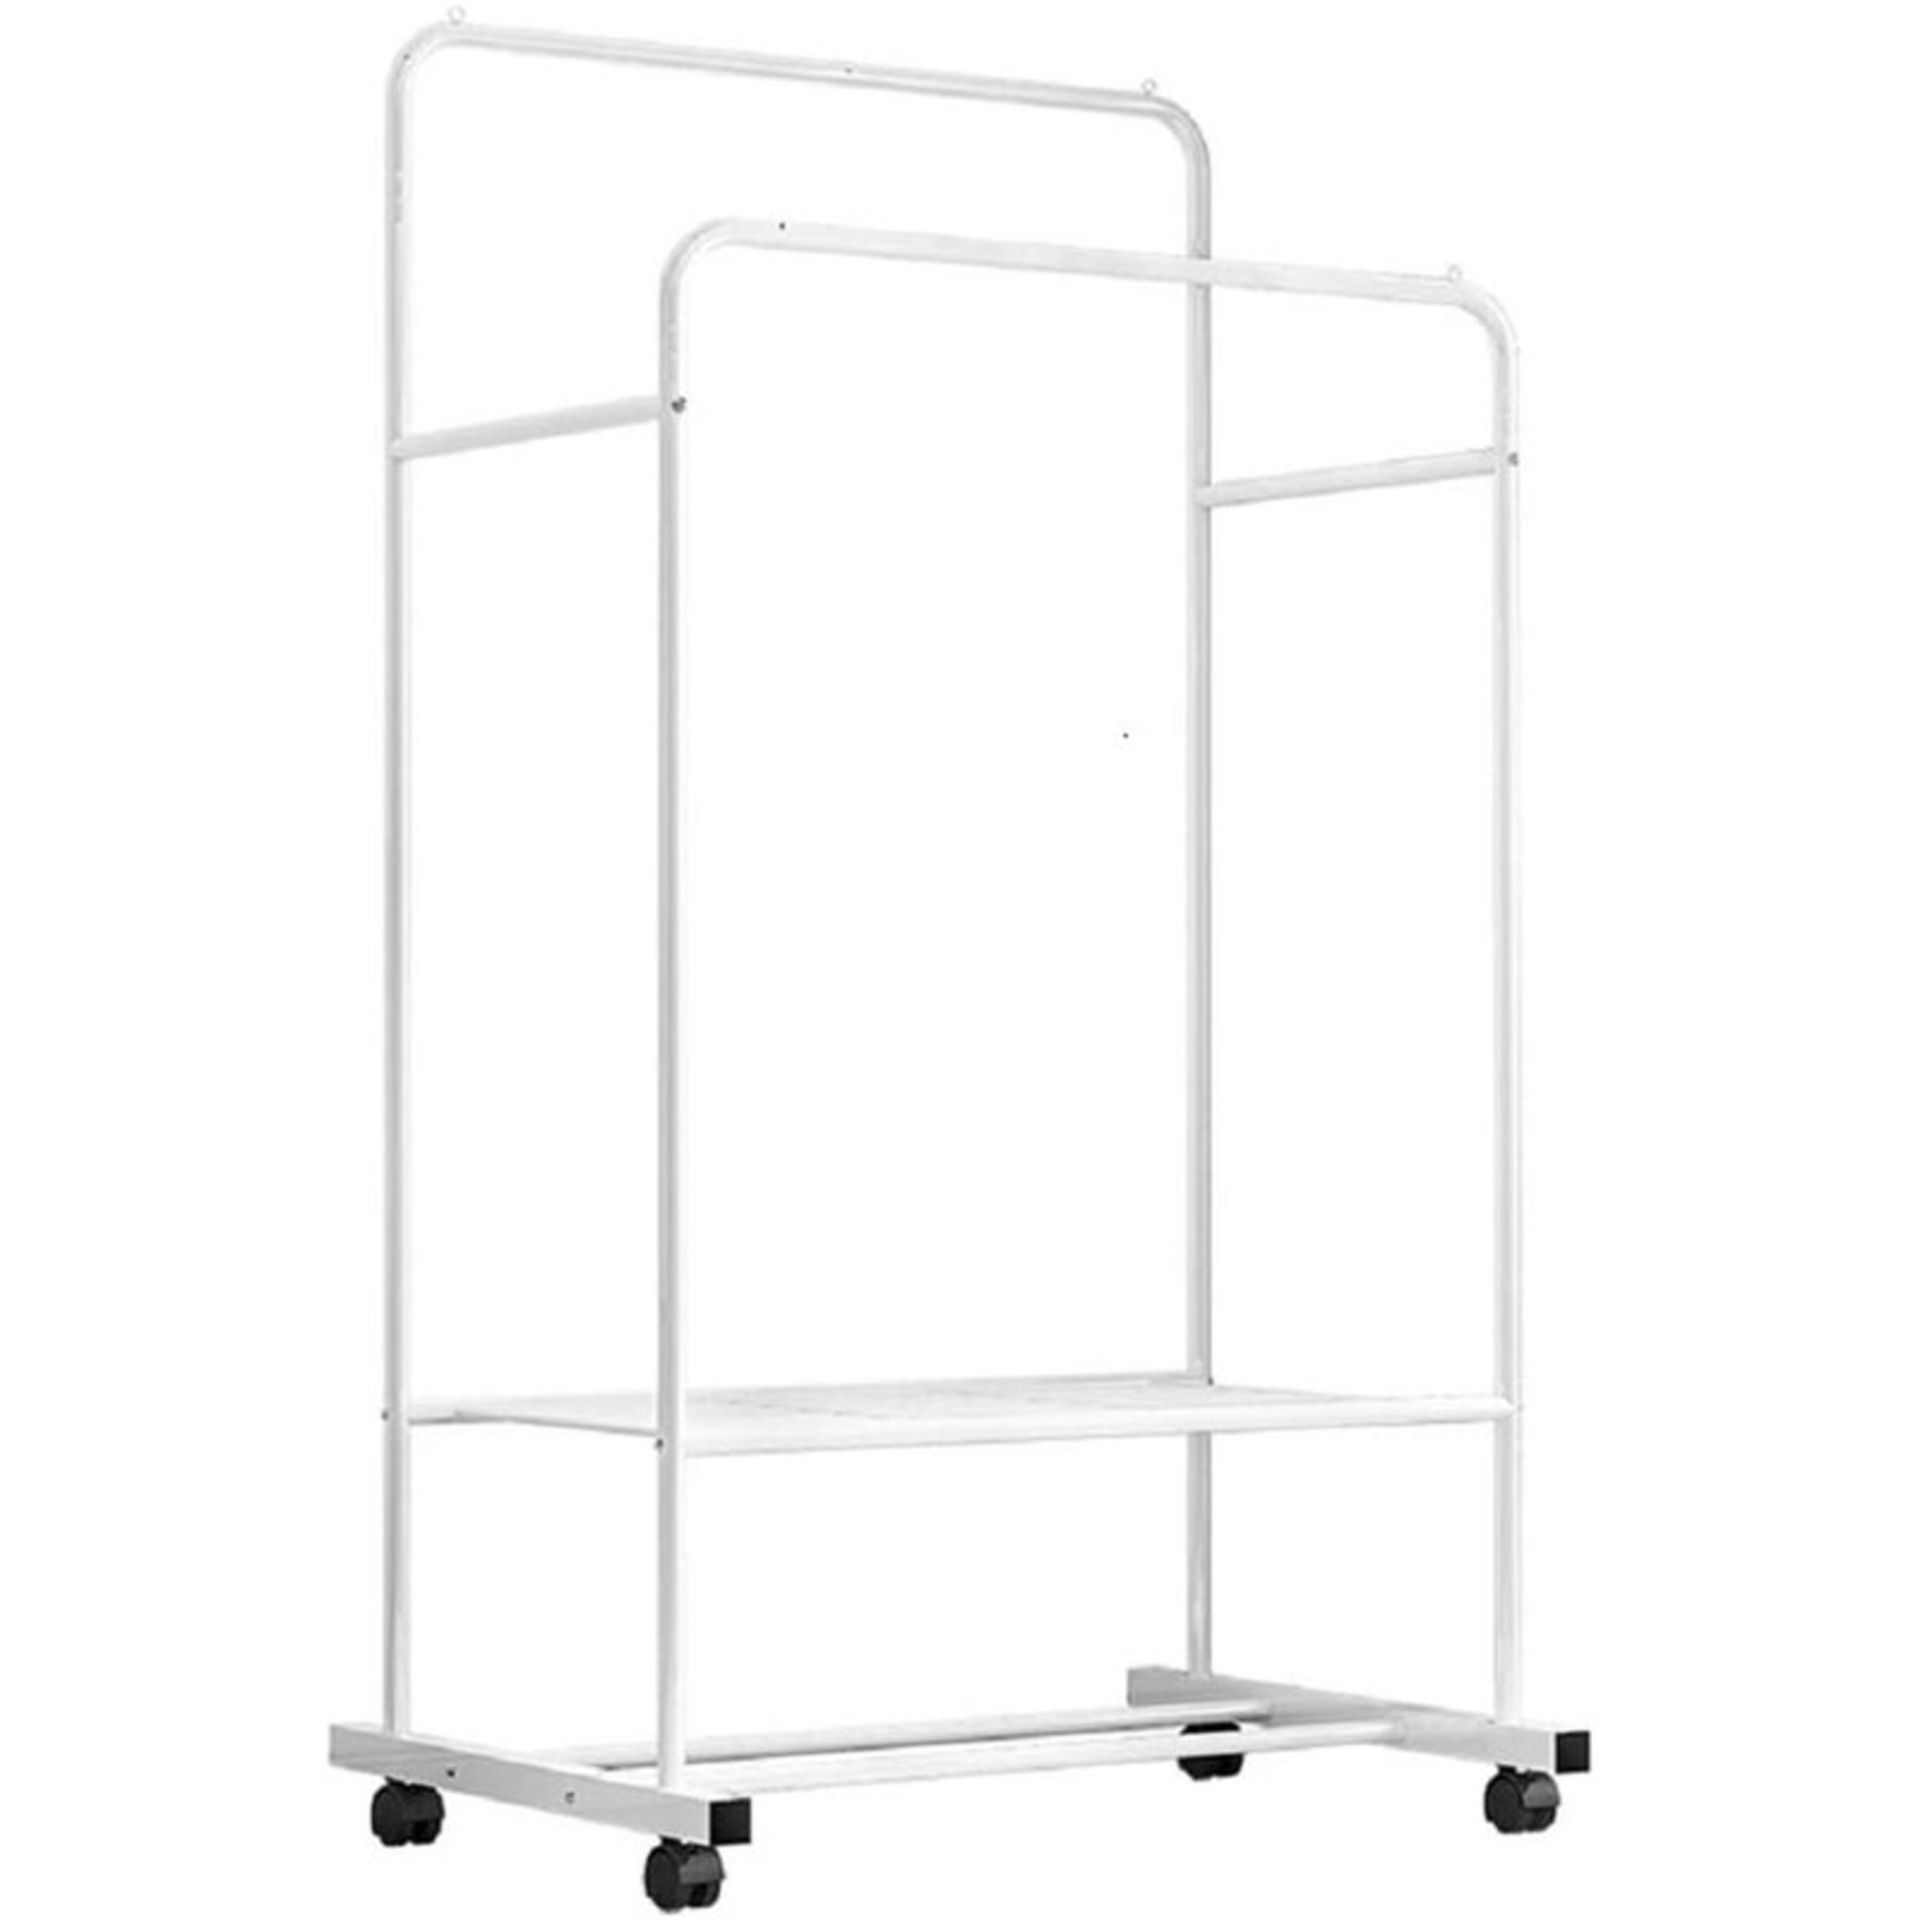 Rolling Clothes Garment Rack Double Rail On Wheels - RRP £54.99. - Image 3 of 4